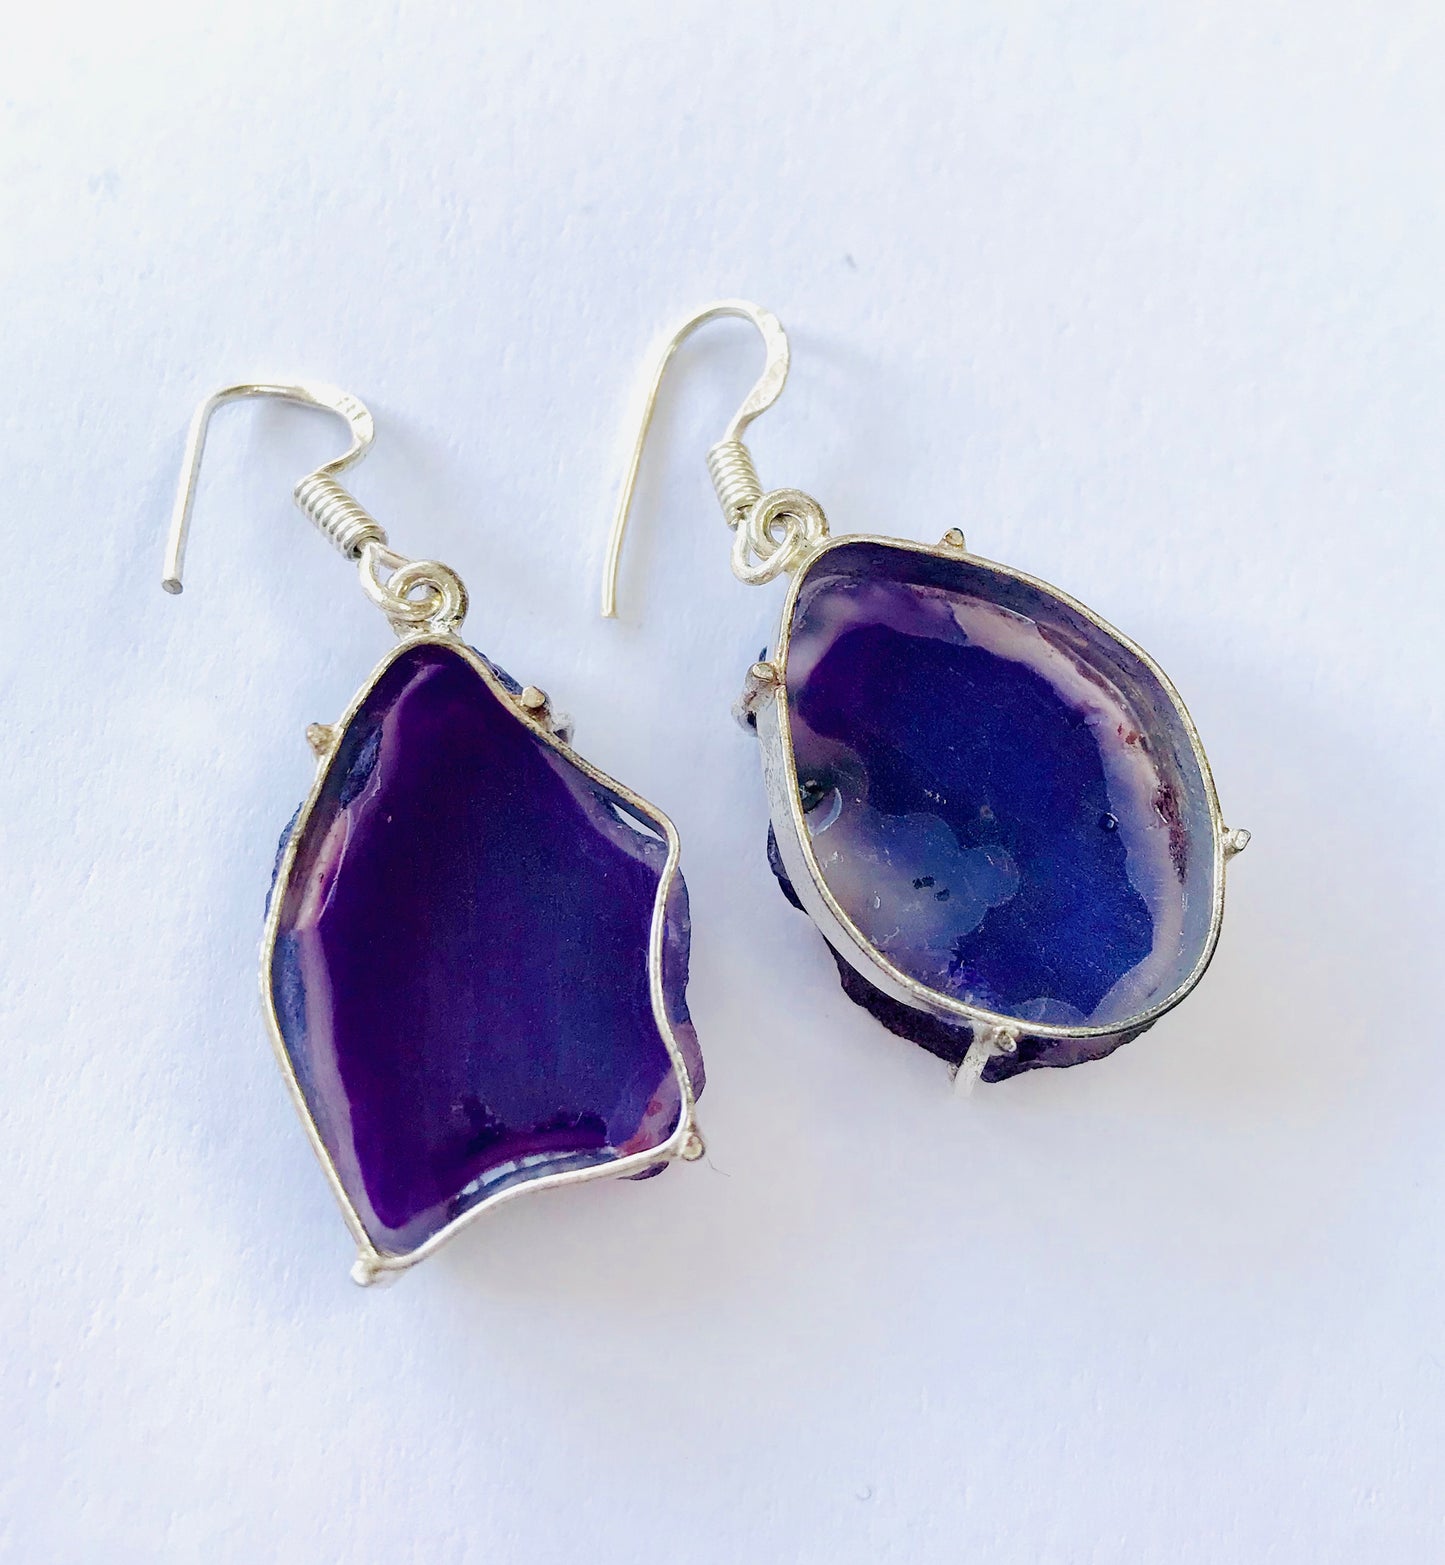 Druzy Crystal Geode Slice Gemstone Earrings Purple Collection - Crystal Boutique.co.uk 